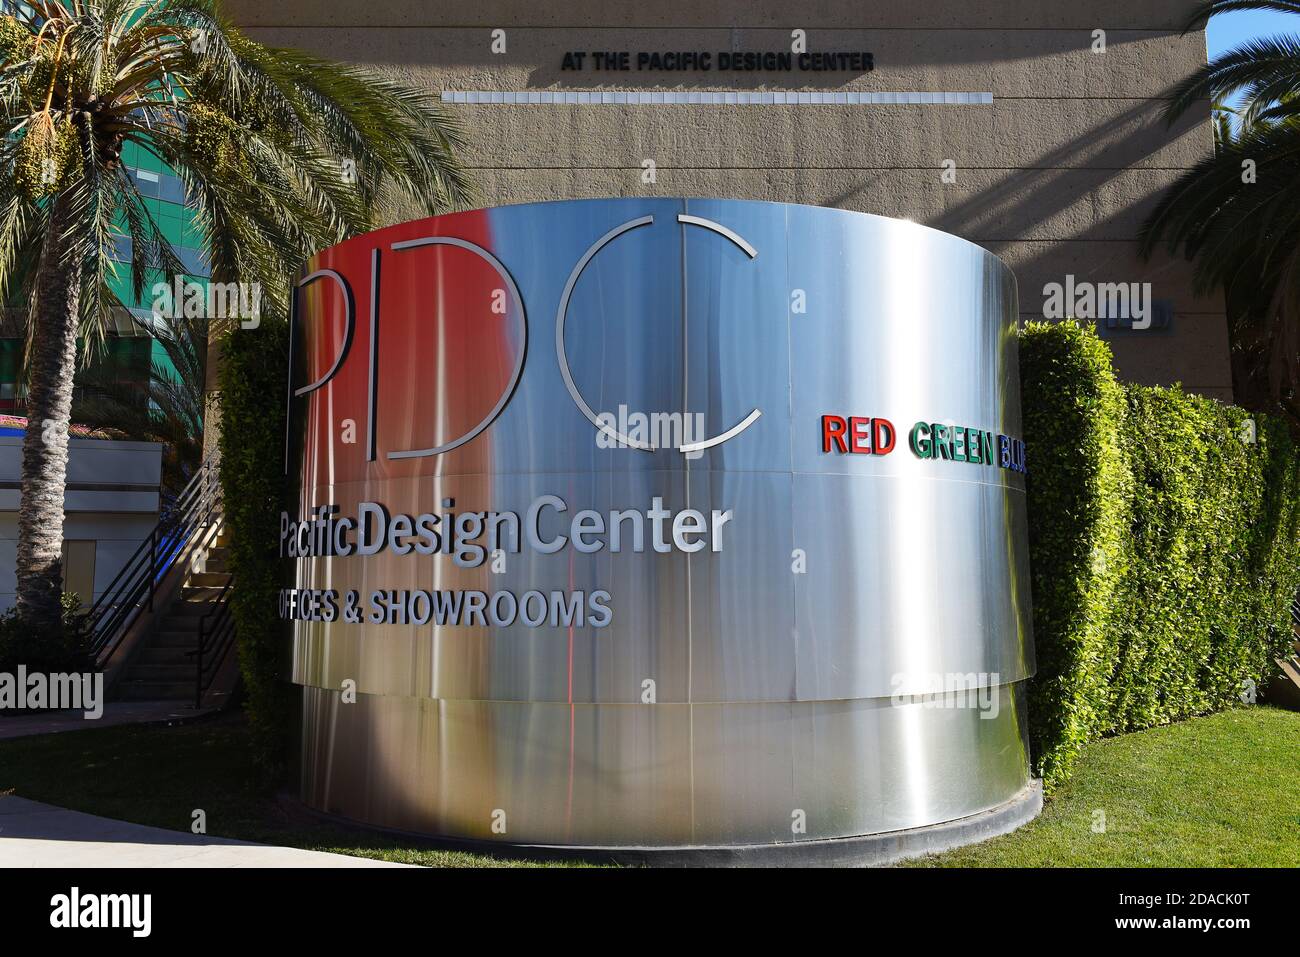 WEST HOLLYWOOD, CALIFORNIA - 10 NOV 2020: Sign at the Pacific Design Center a mulit-use facility for the design community, with three building in RGB, Stock Photo